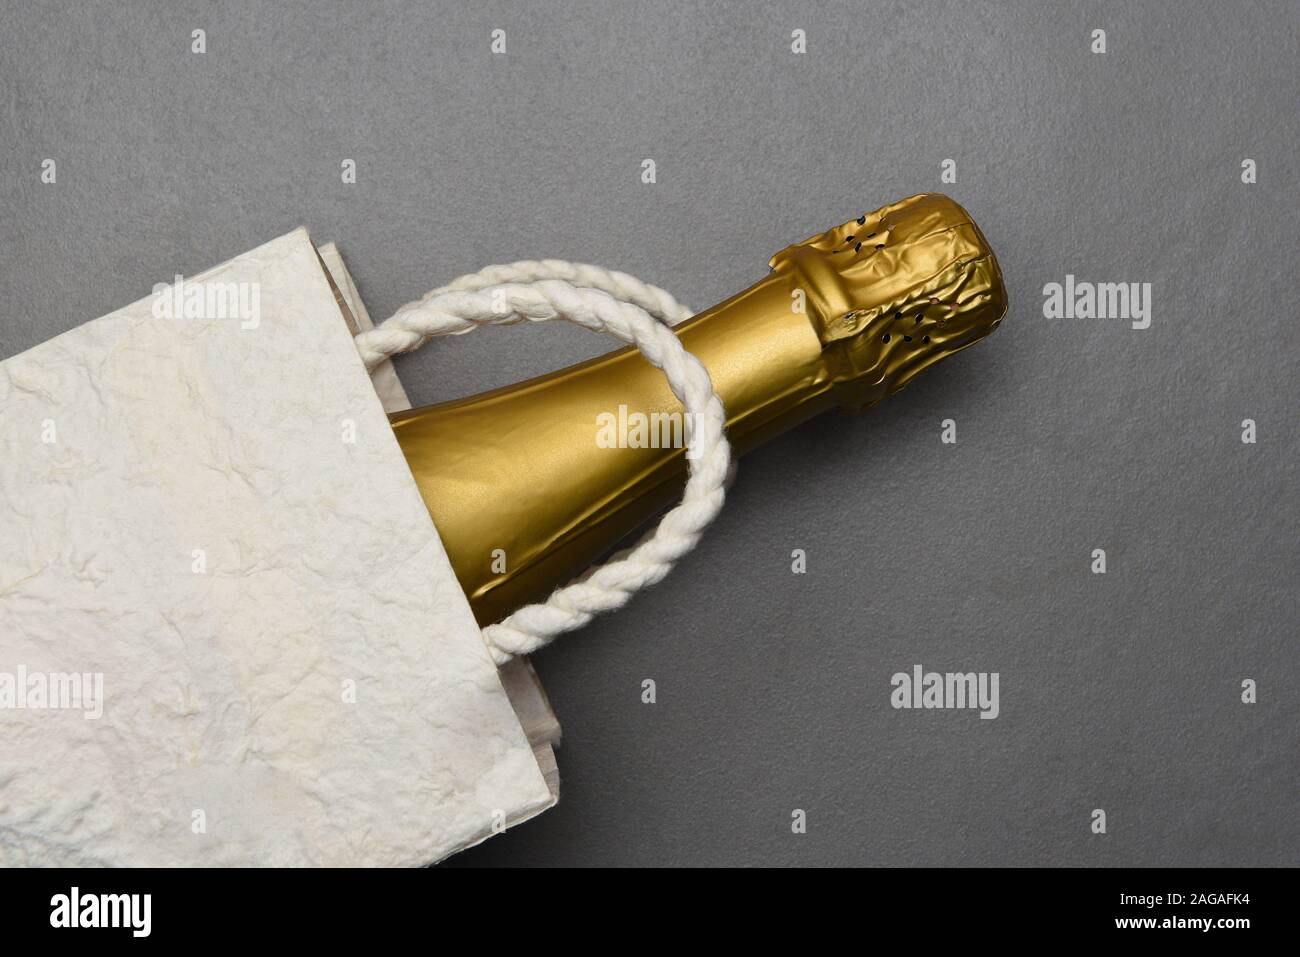 Champagne: Flat Lay Gift Bag with a bottle of sparkling wine on gray tile surface. Stock Photo